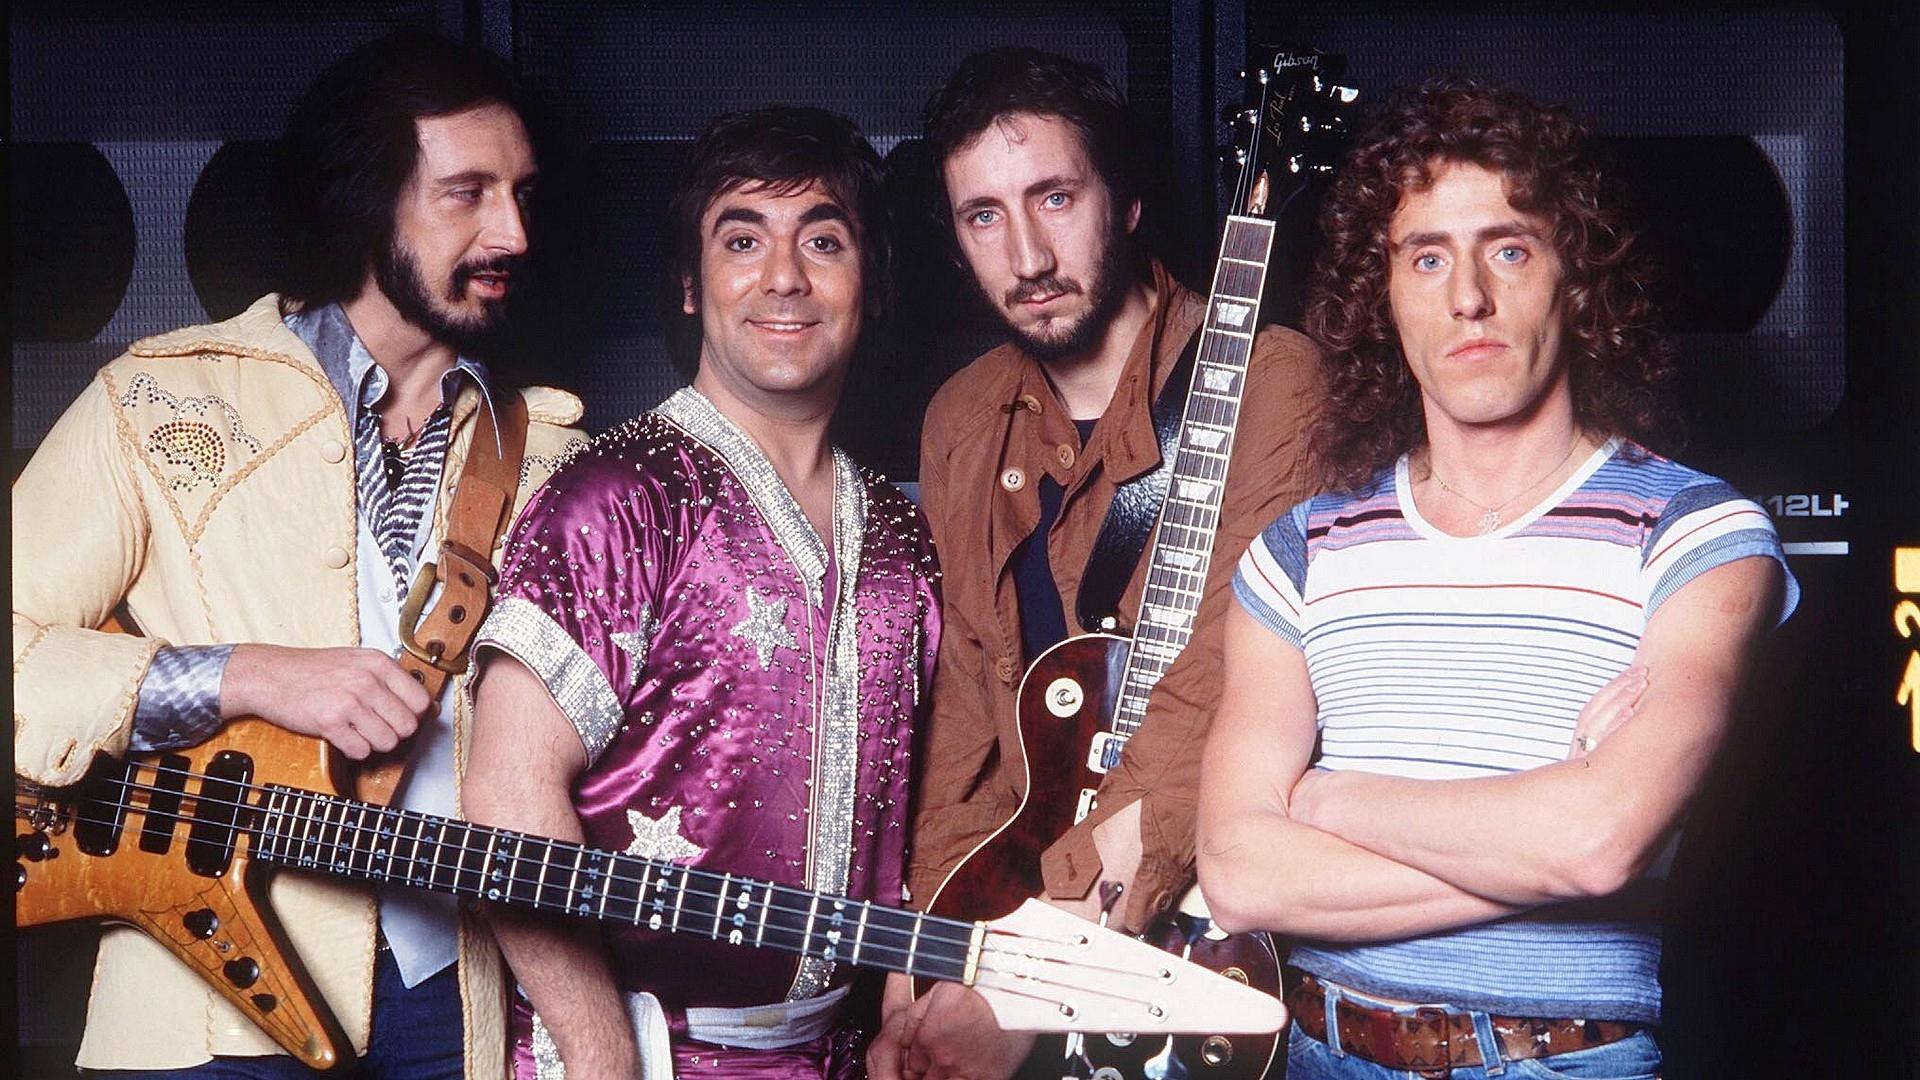 Download wallpaper 1920x1080 the who, guitars, youth, band, smile HD